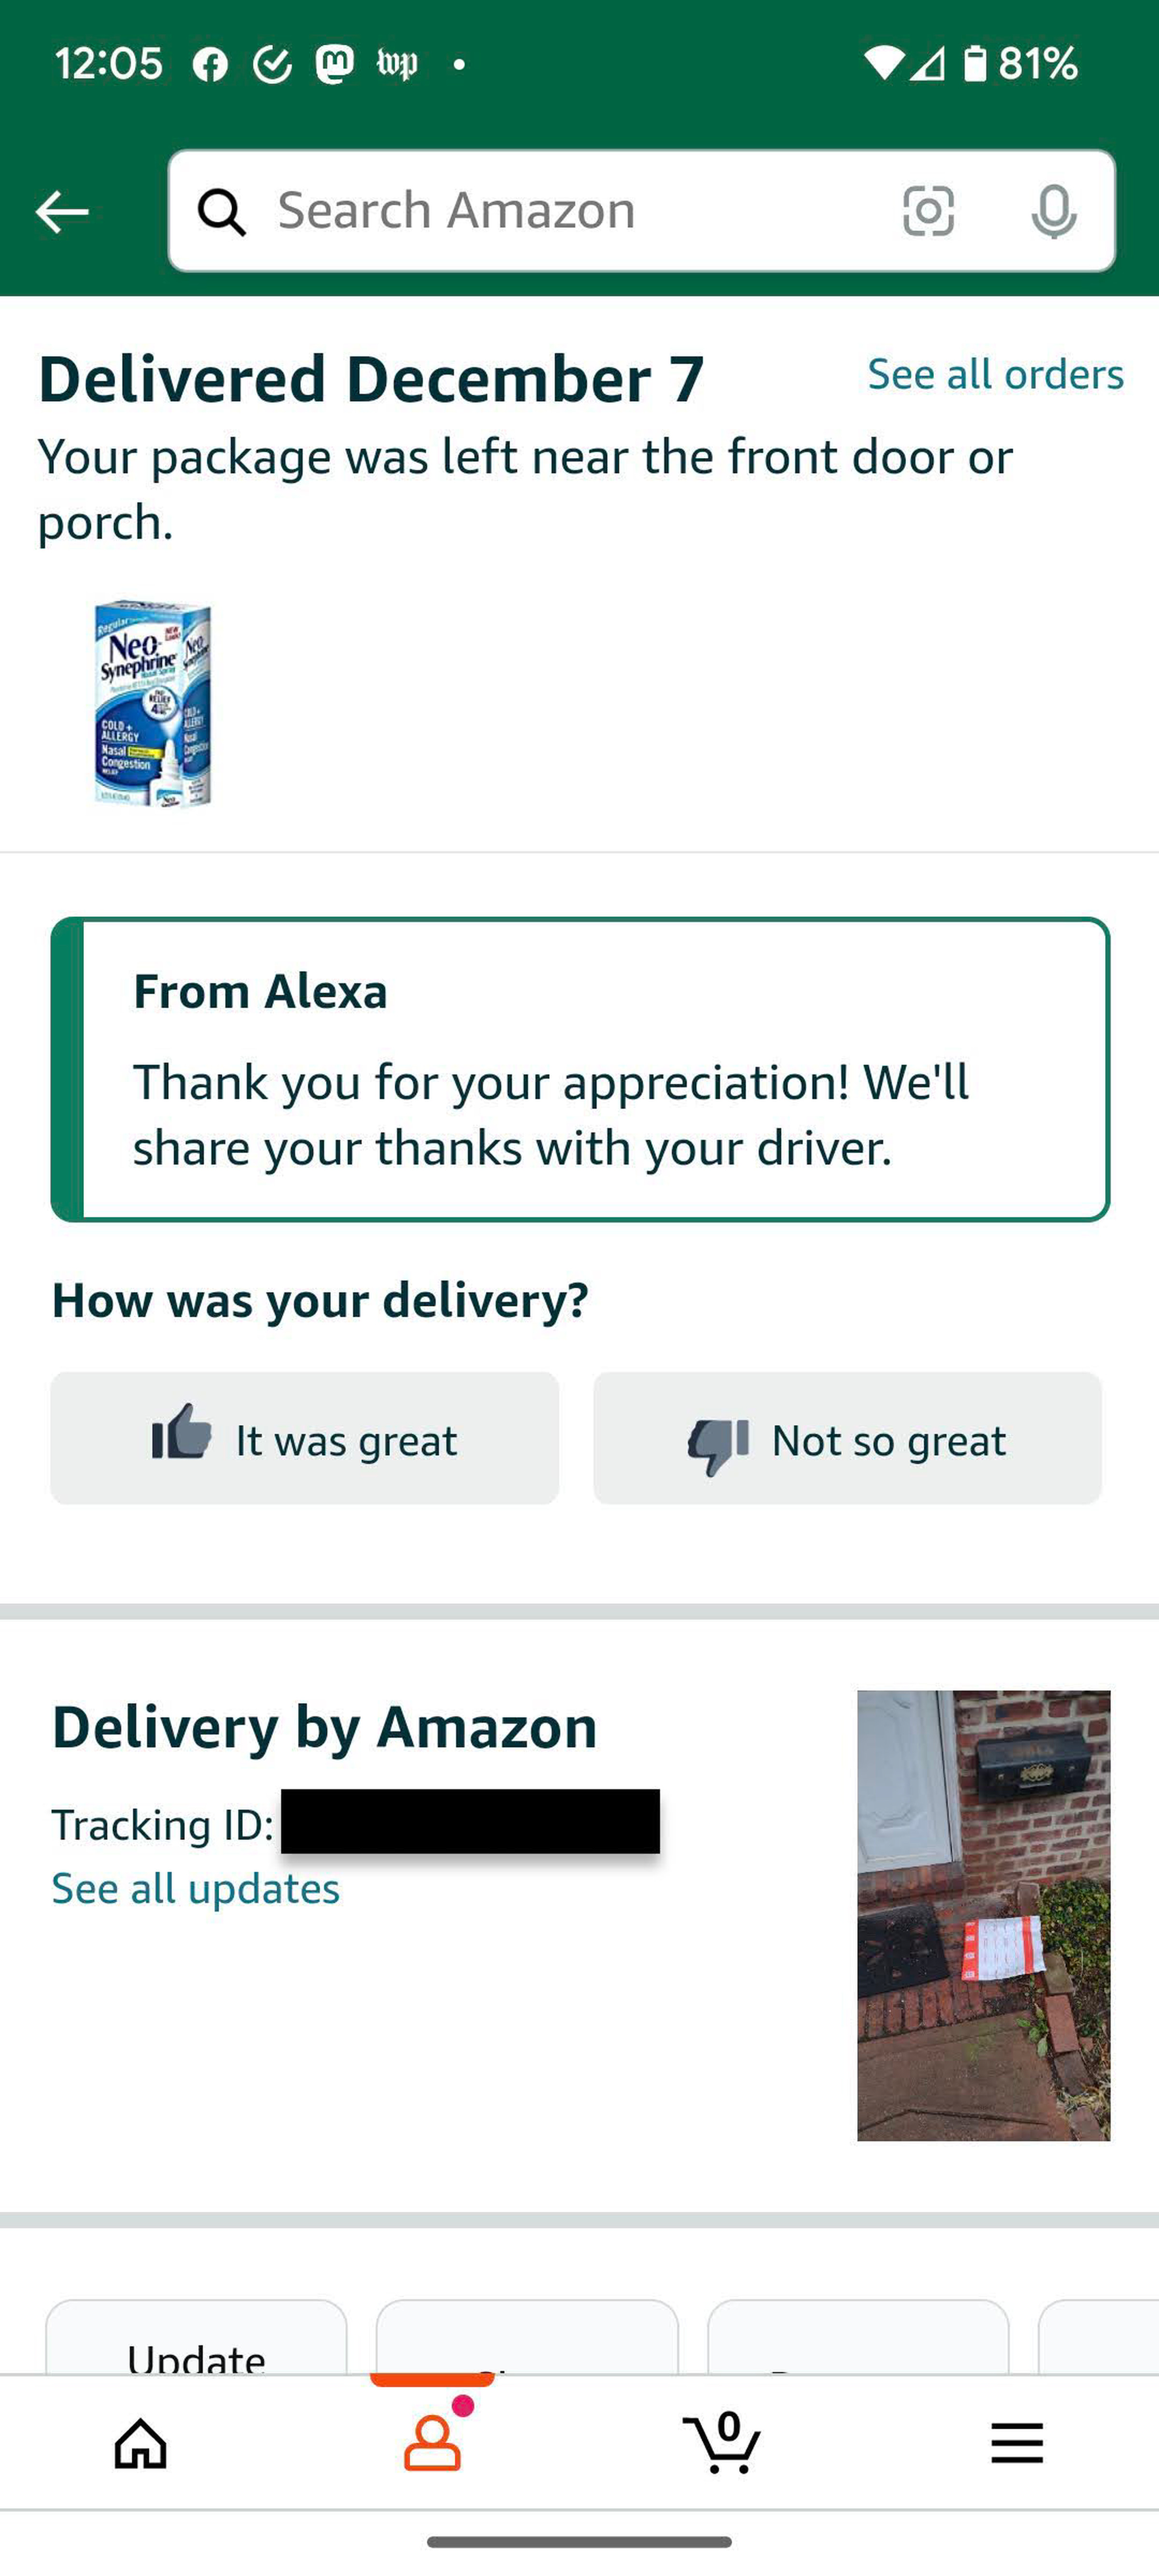 Amazon page showing that a product was delivered, along with a message reading “From Alexa: Thank you for your appreciation! We’ll share your thanks with the driver.”